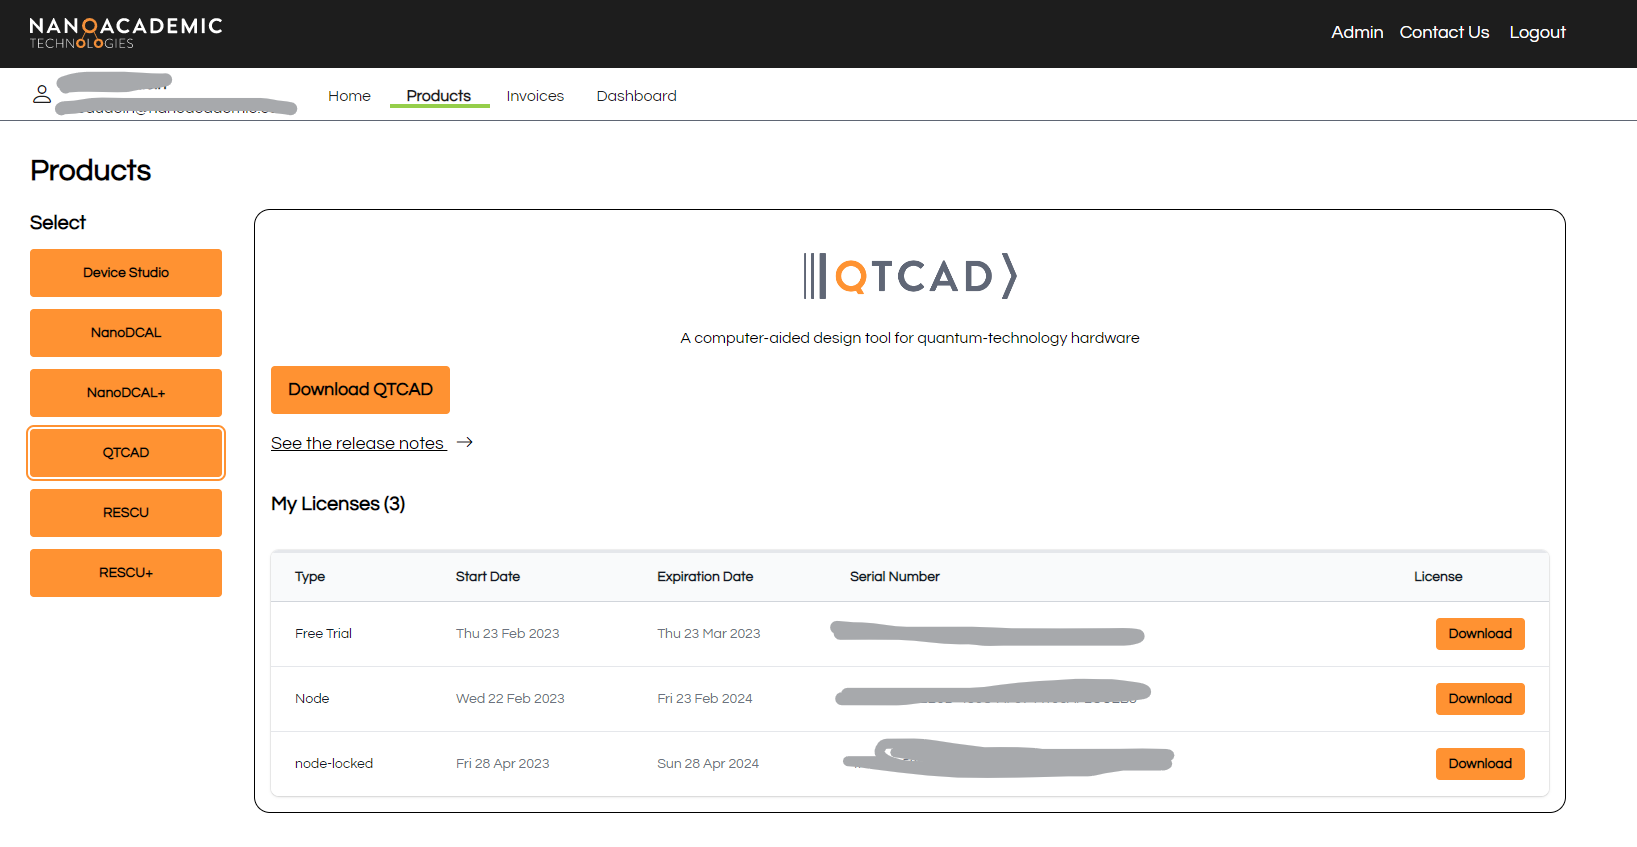 Getting a commercial QTCAD license